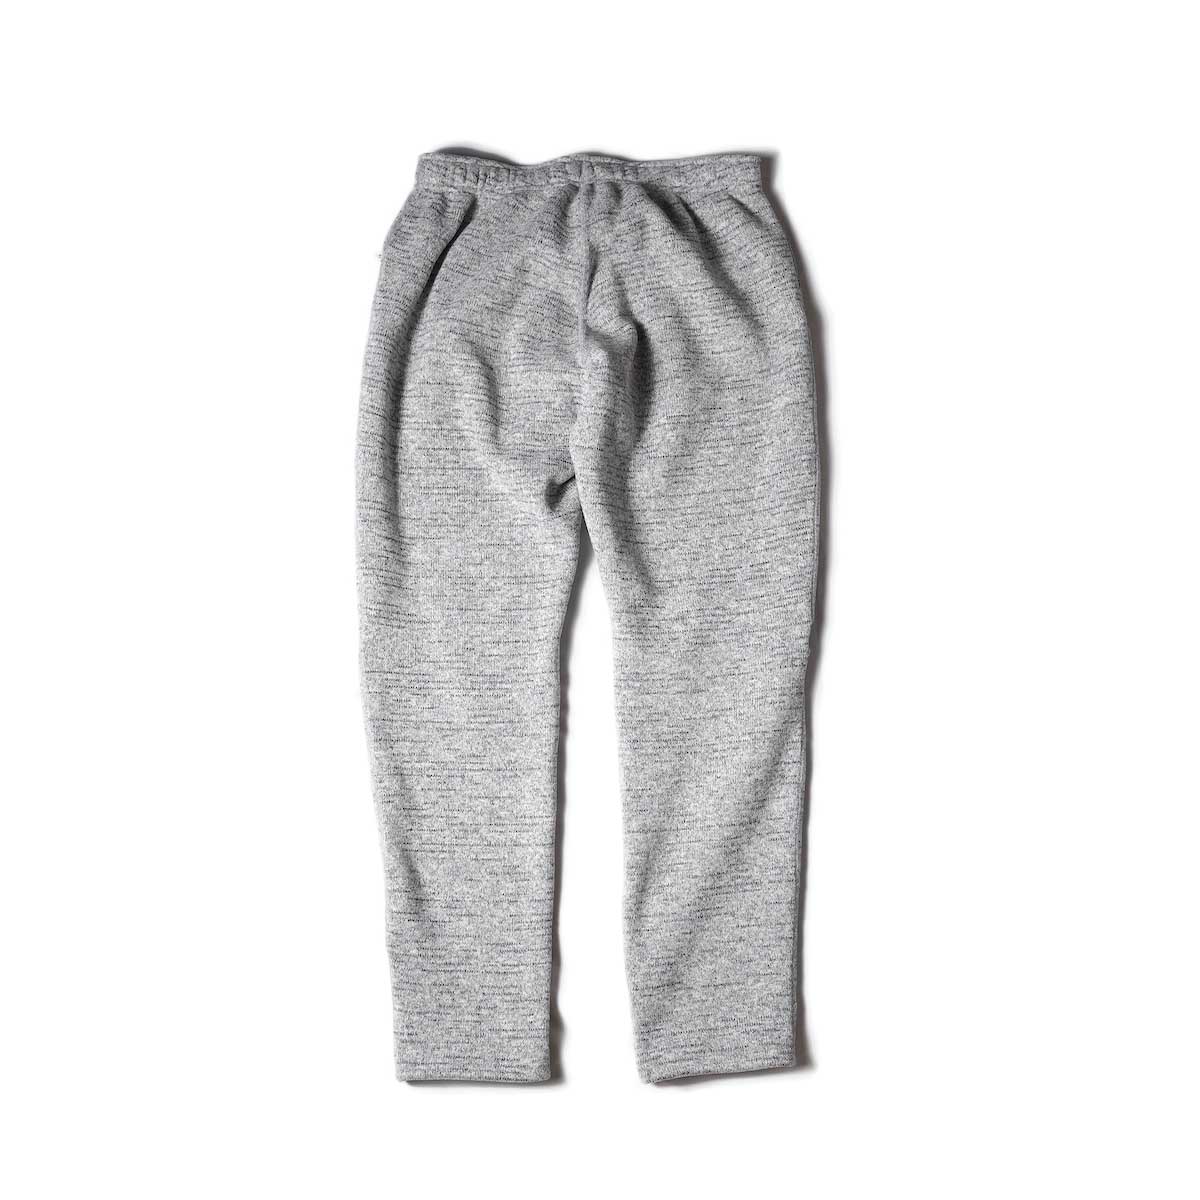 South2 West8 / 2P Cycle Pant - POLARTEC Fleece Lined Jersey (Grey)背面